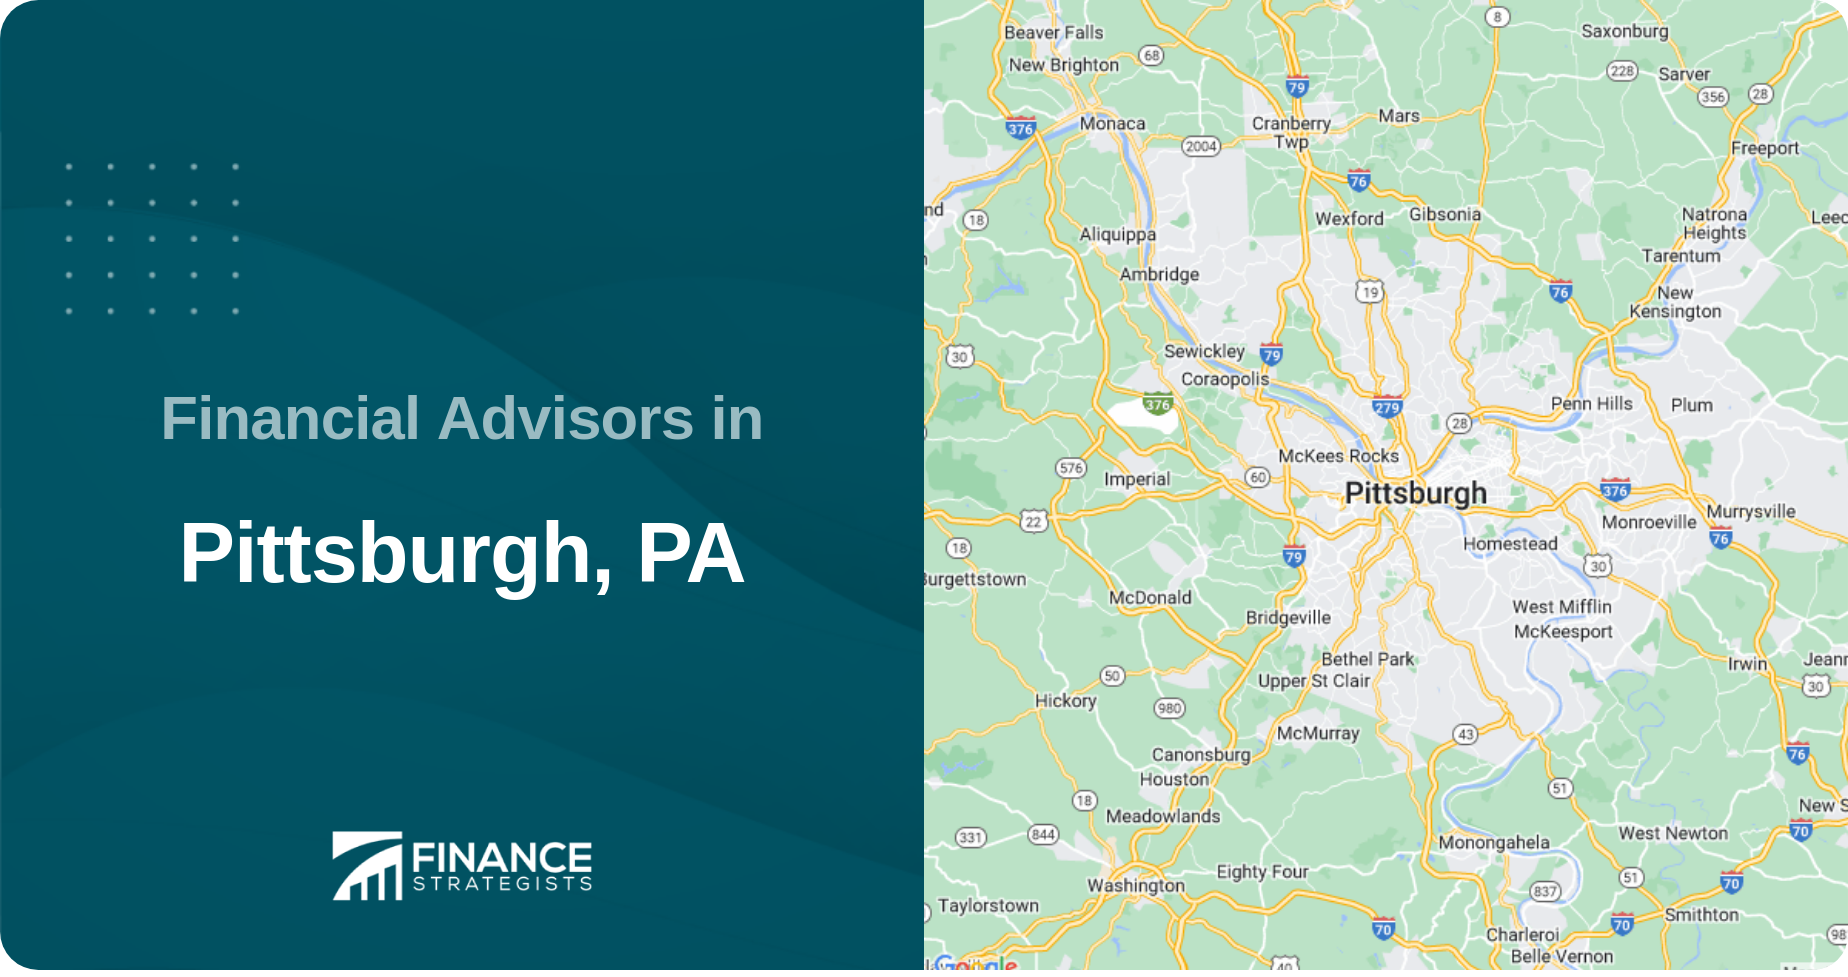 Financial Advisors in Pittsburgh, PA